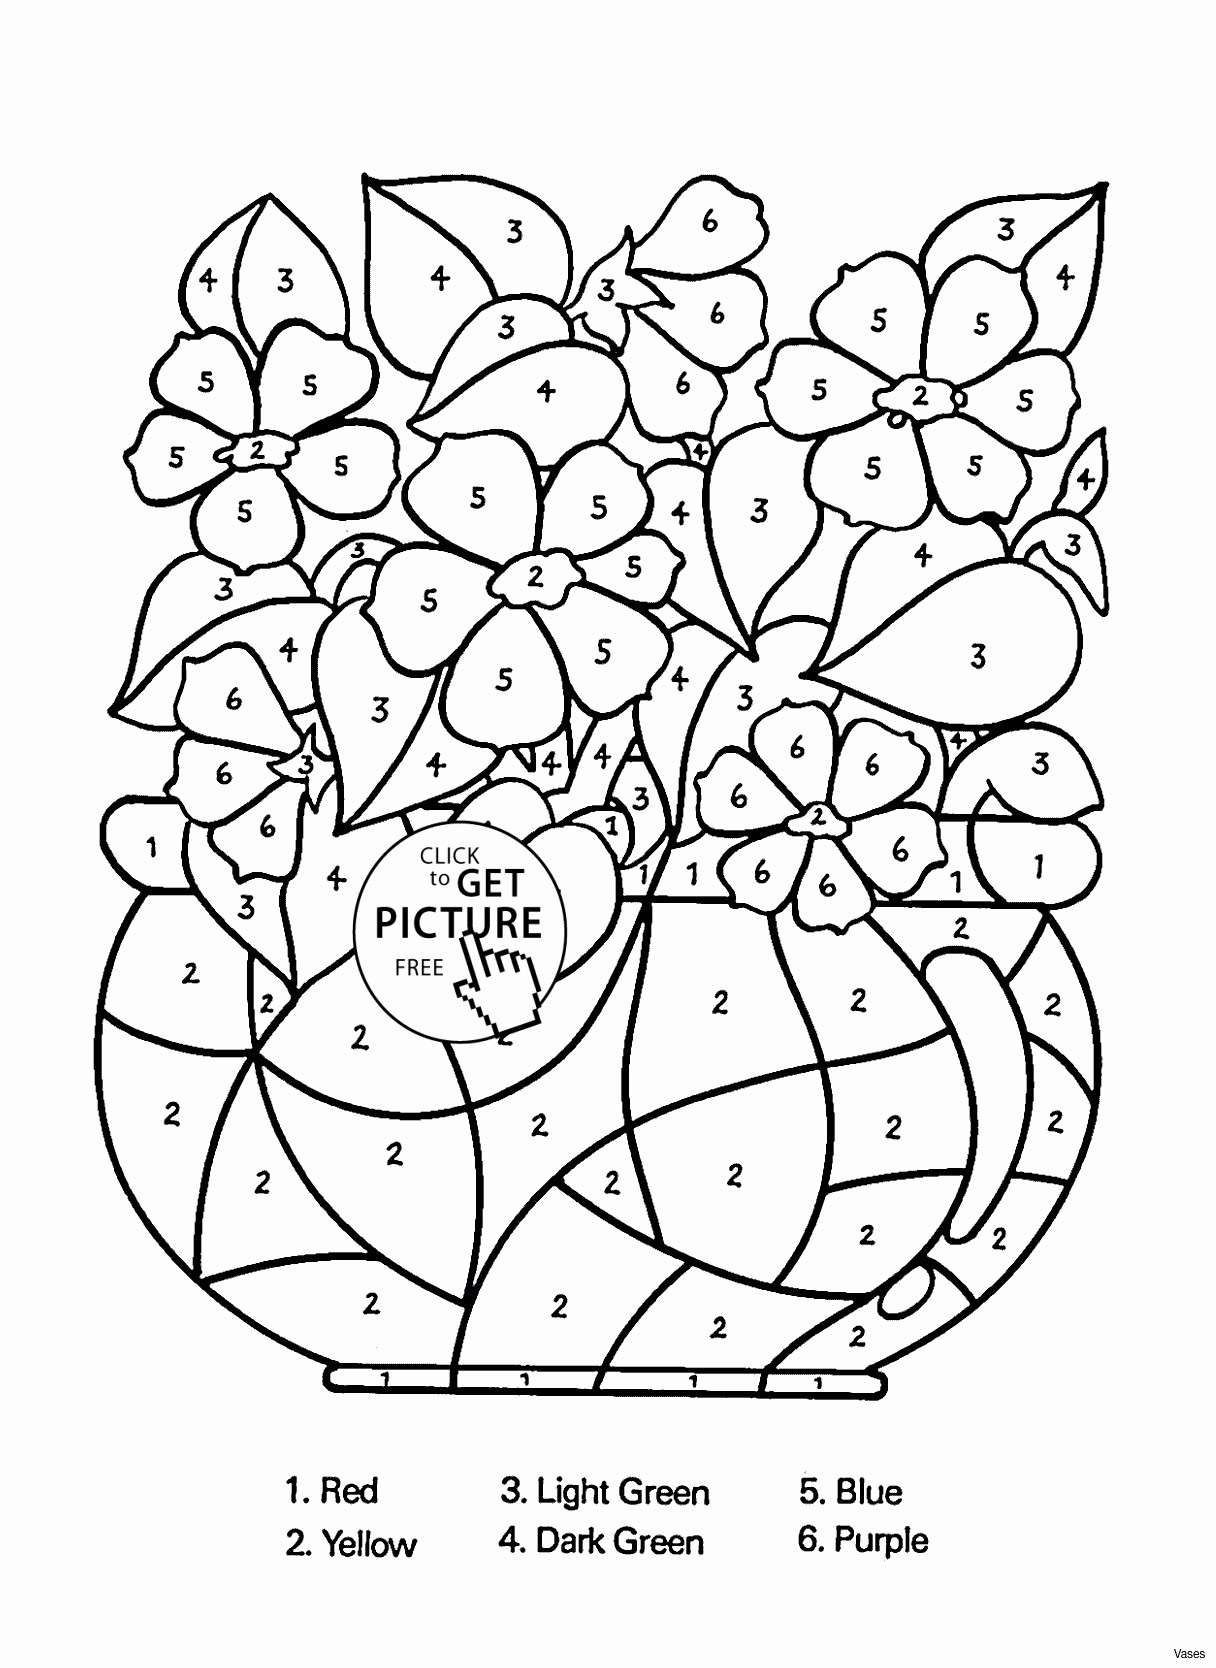 27 Recommended 8 Square Vase 2024 free download 8 square vase of white glass vase elegant vases flower vase coloring page pages intended for white glass vase elegant vases flower vase coloring page pages flowers in a top i 0d